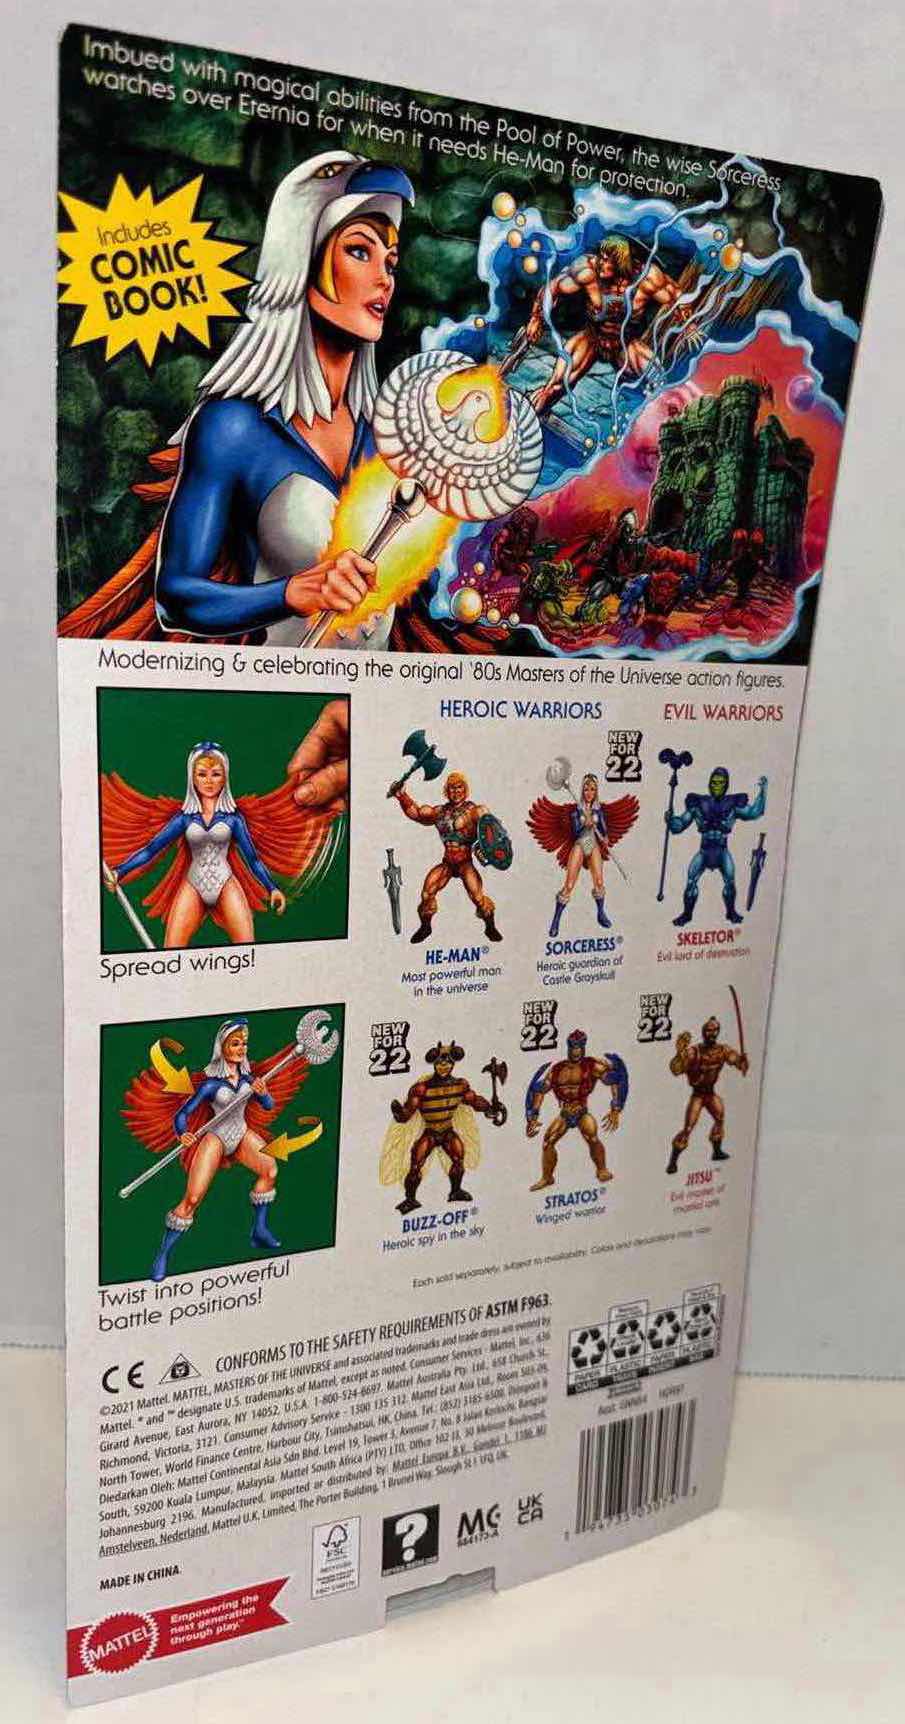 Photo 3 of NEW MATTEL MASTERS OF THE UNIVERSE “SORCERESS” ACTION FIGURE & ACCESSORIES (1)